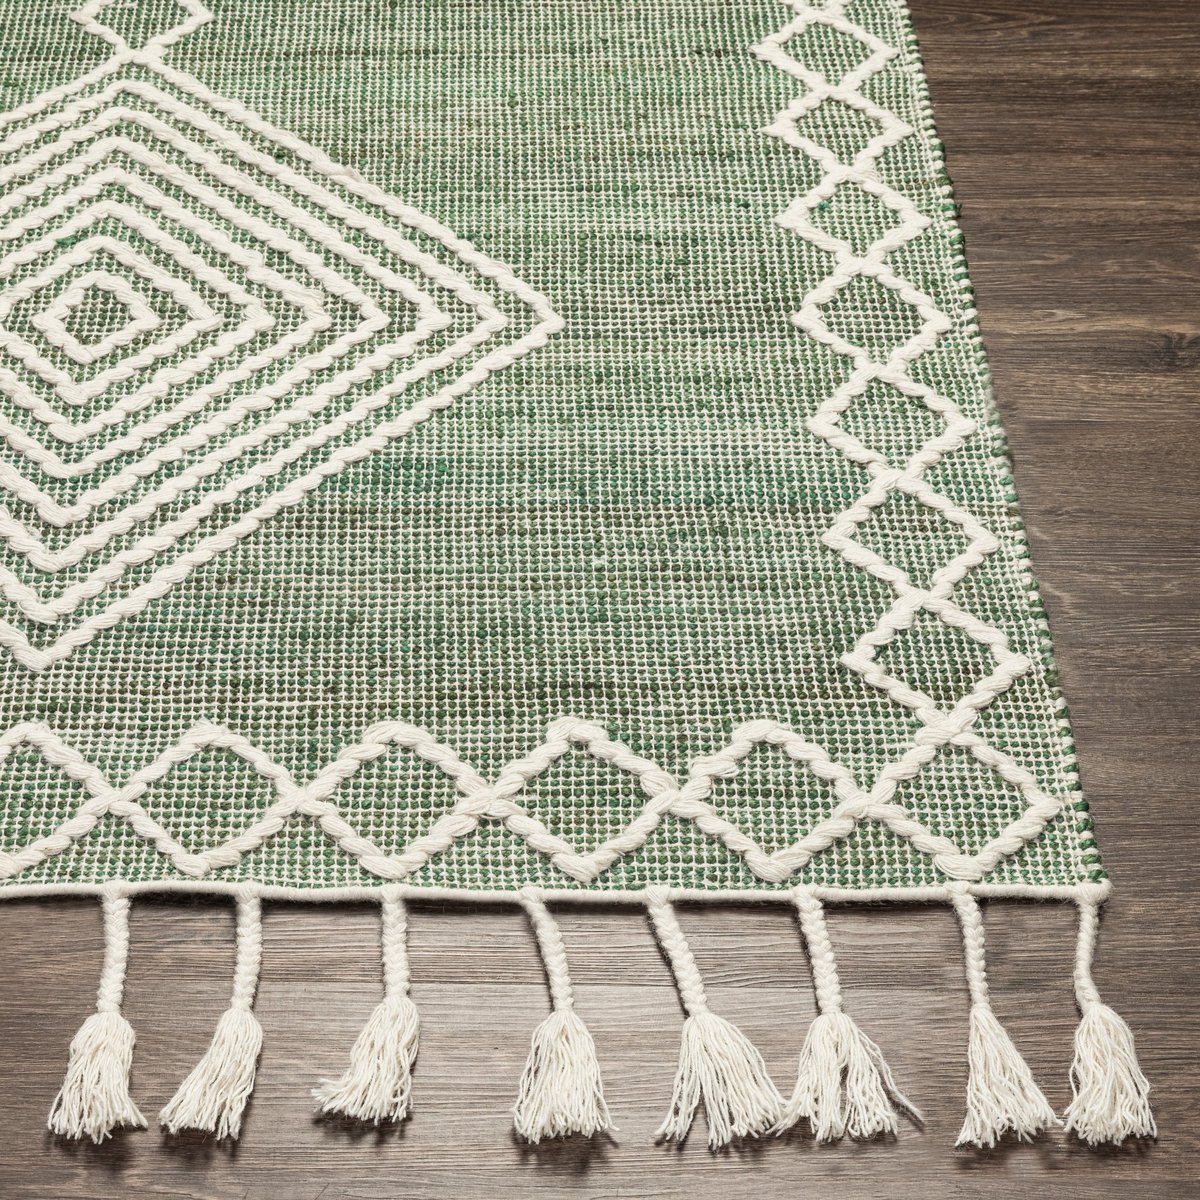 https://image1.rugs-direct.com/cdn-cgi/image/width=1200,height=1200/rug_gallery/00114/19870/145663/233949/ws_nwd2305-front.jpg